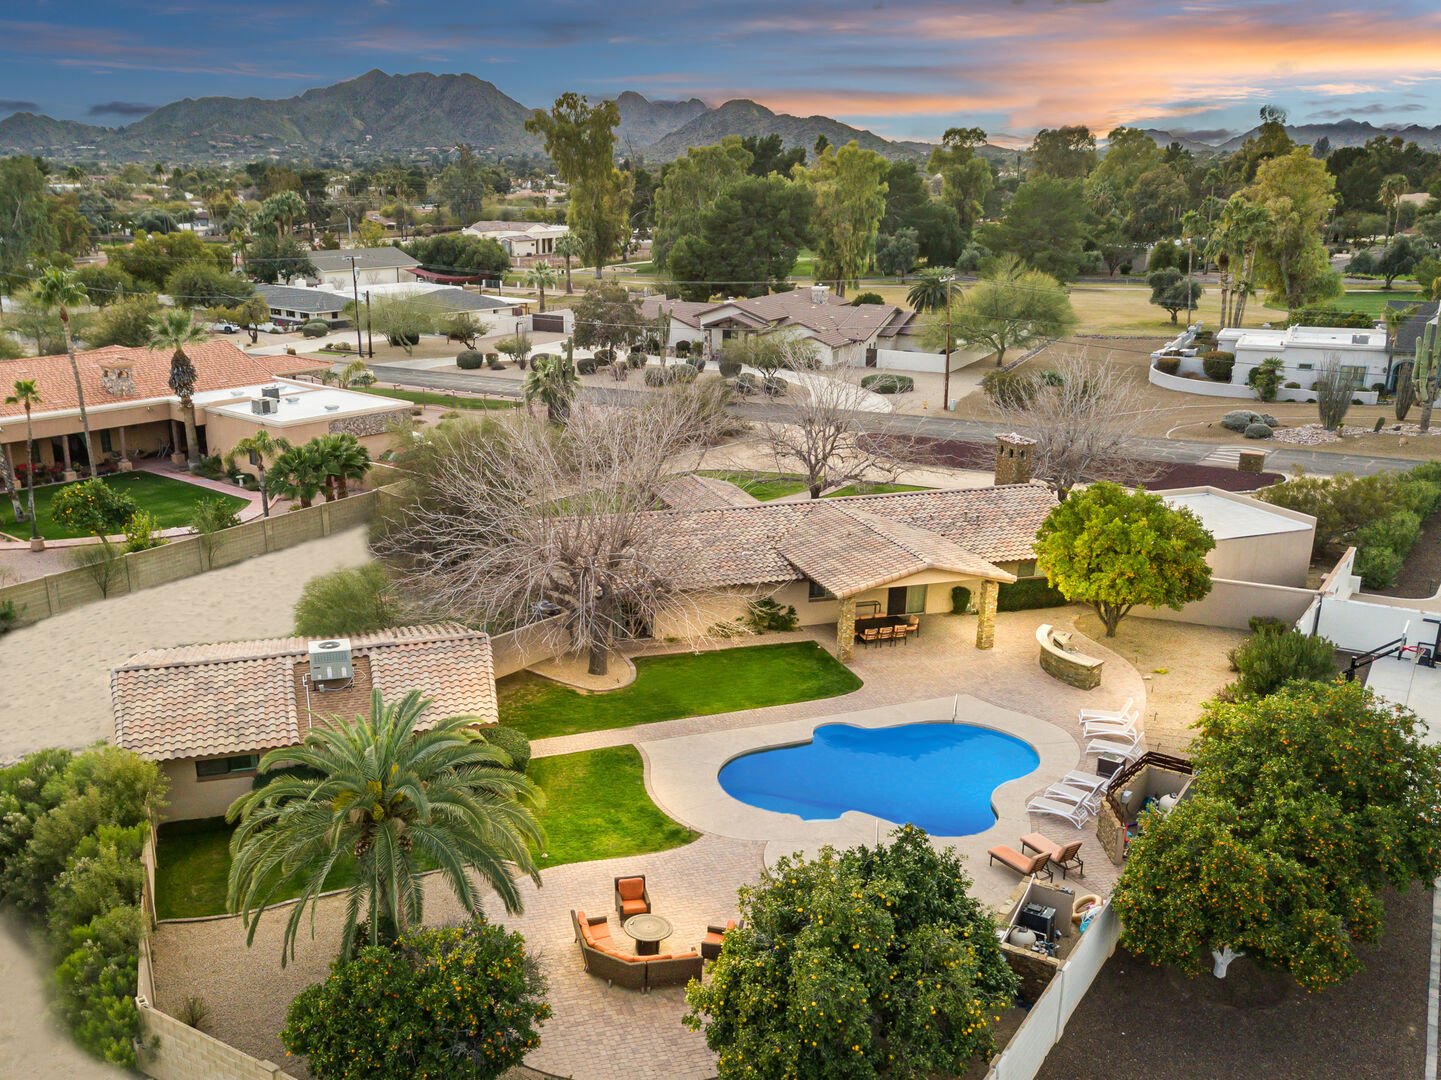 Check out our past luxury real estate scottsdale az today